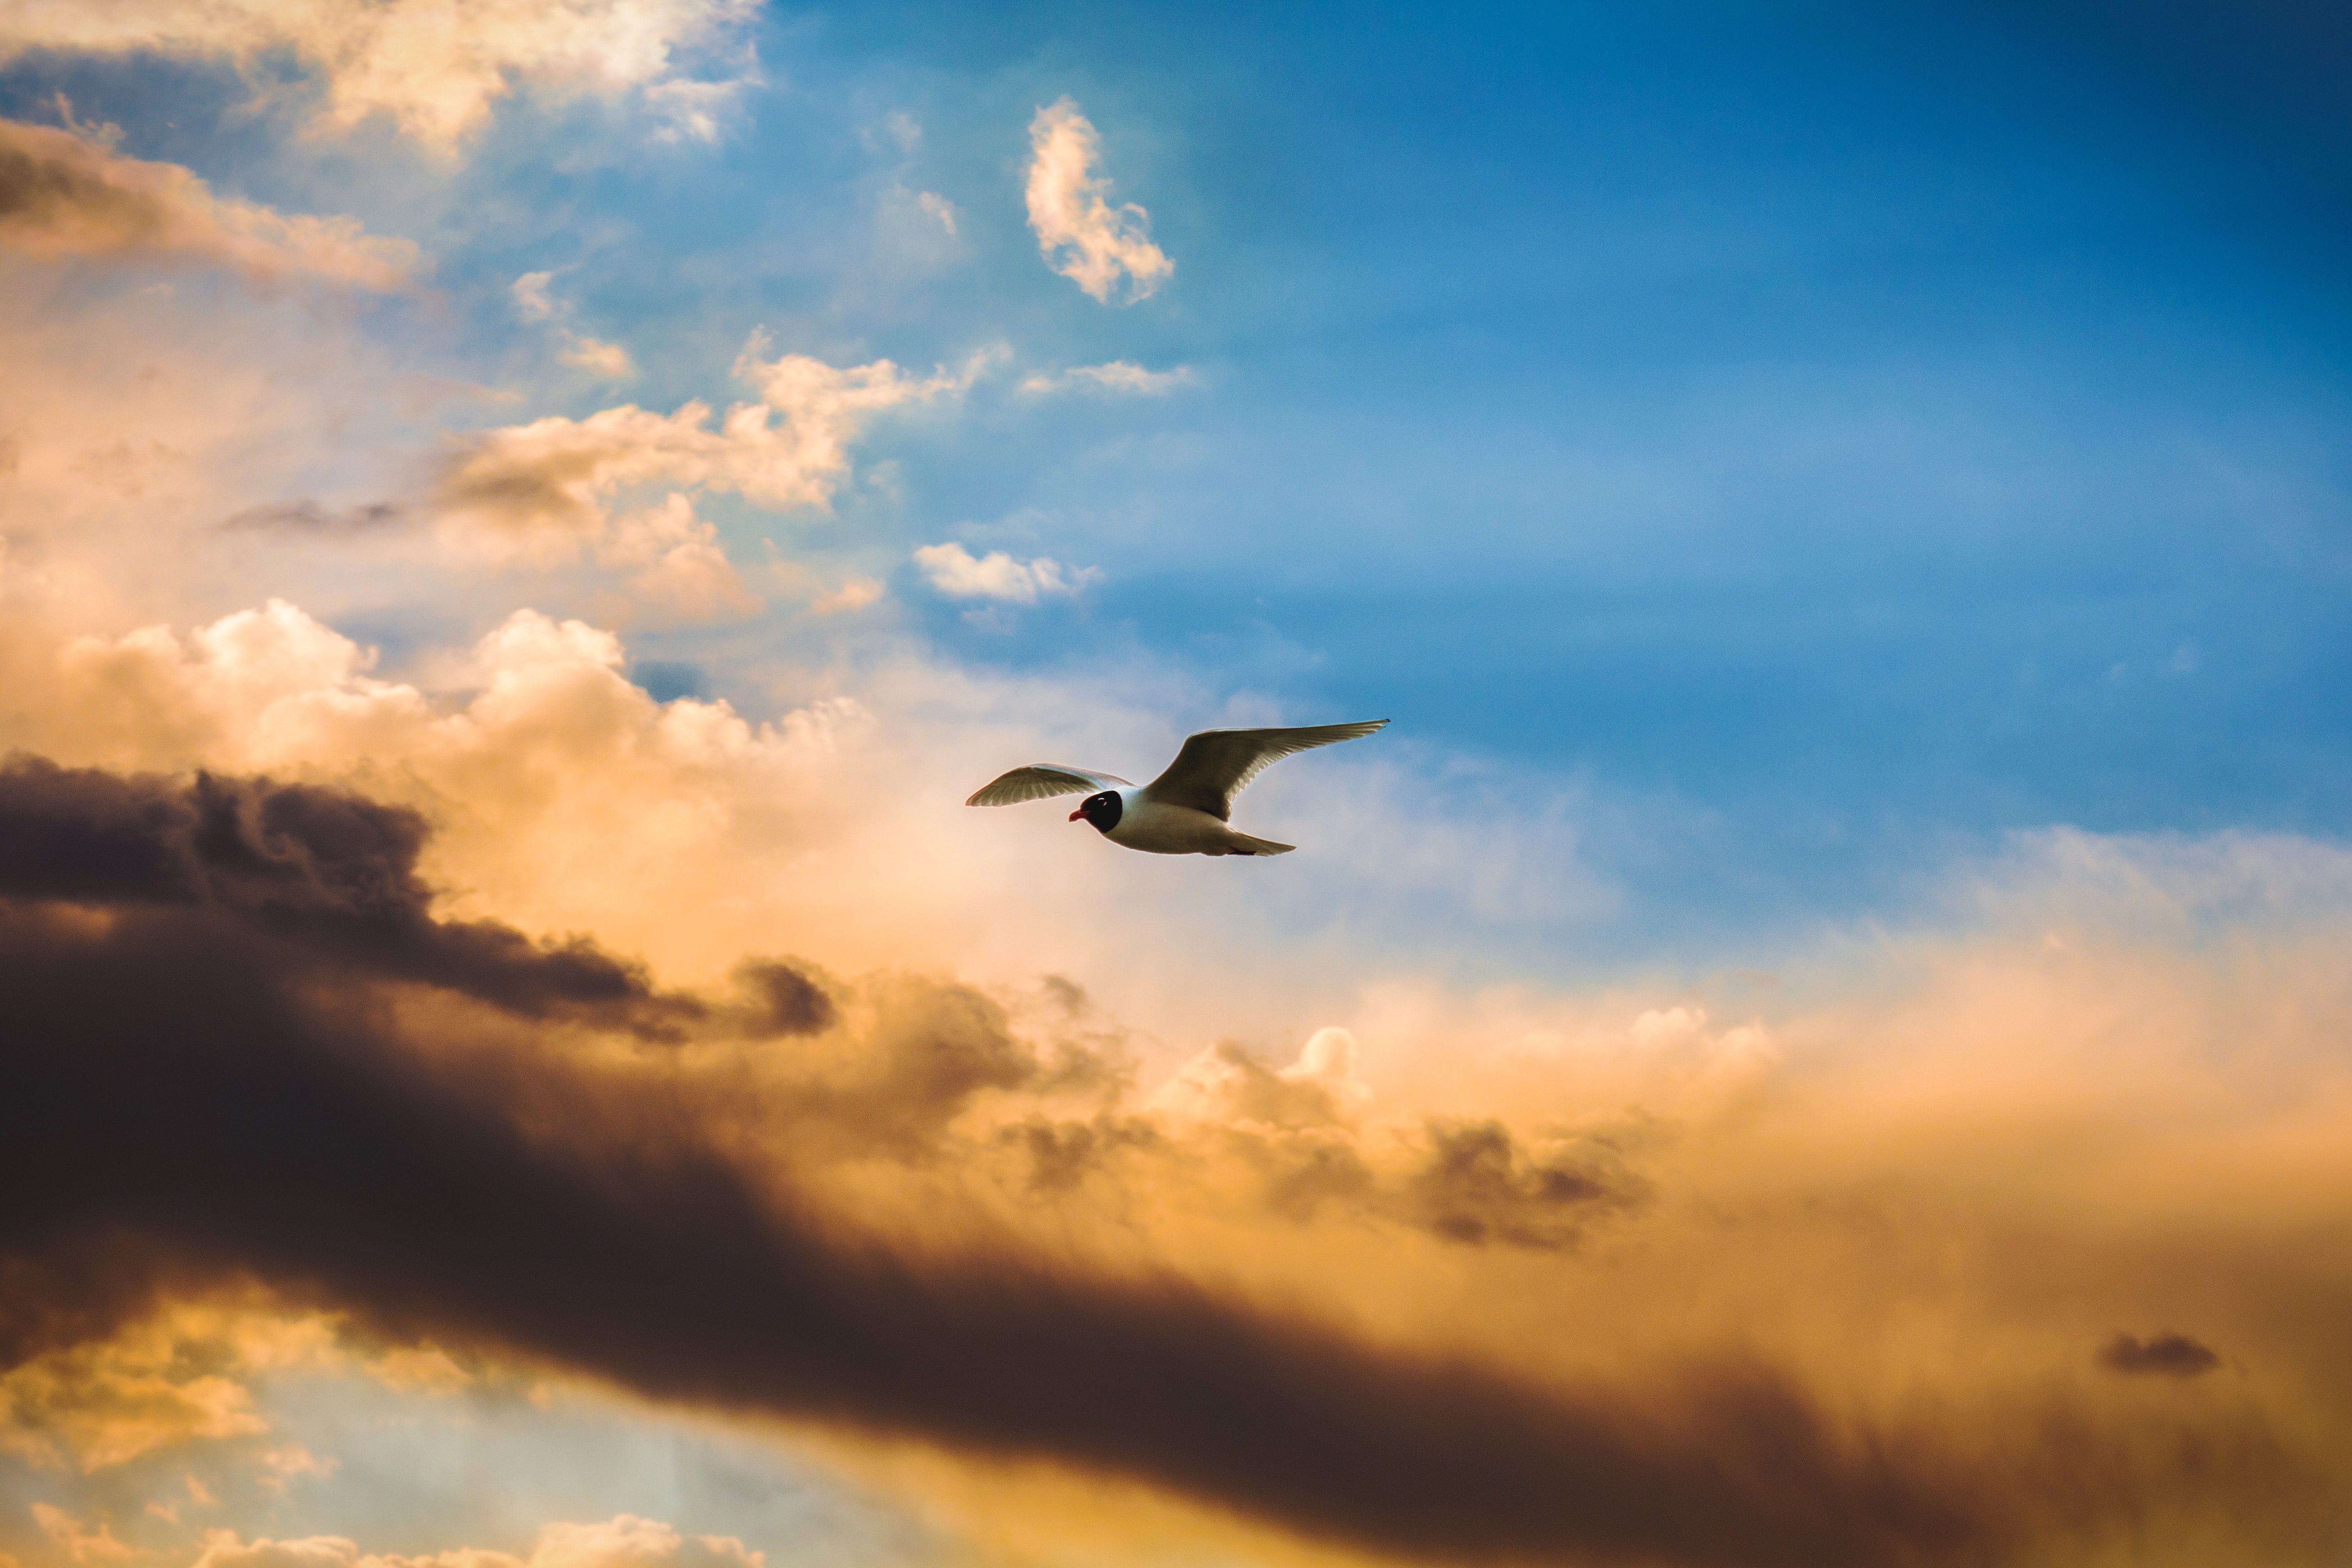 154738 download wallpaper animals, sky, clouds, bird, flight screensavers and pictures for free